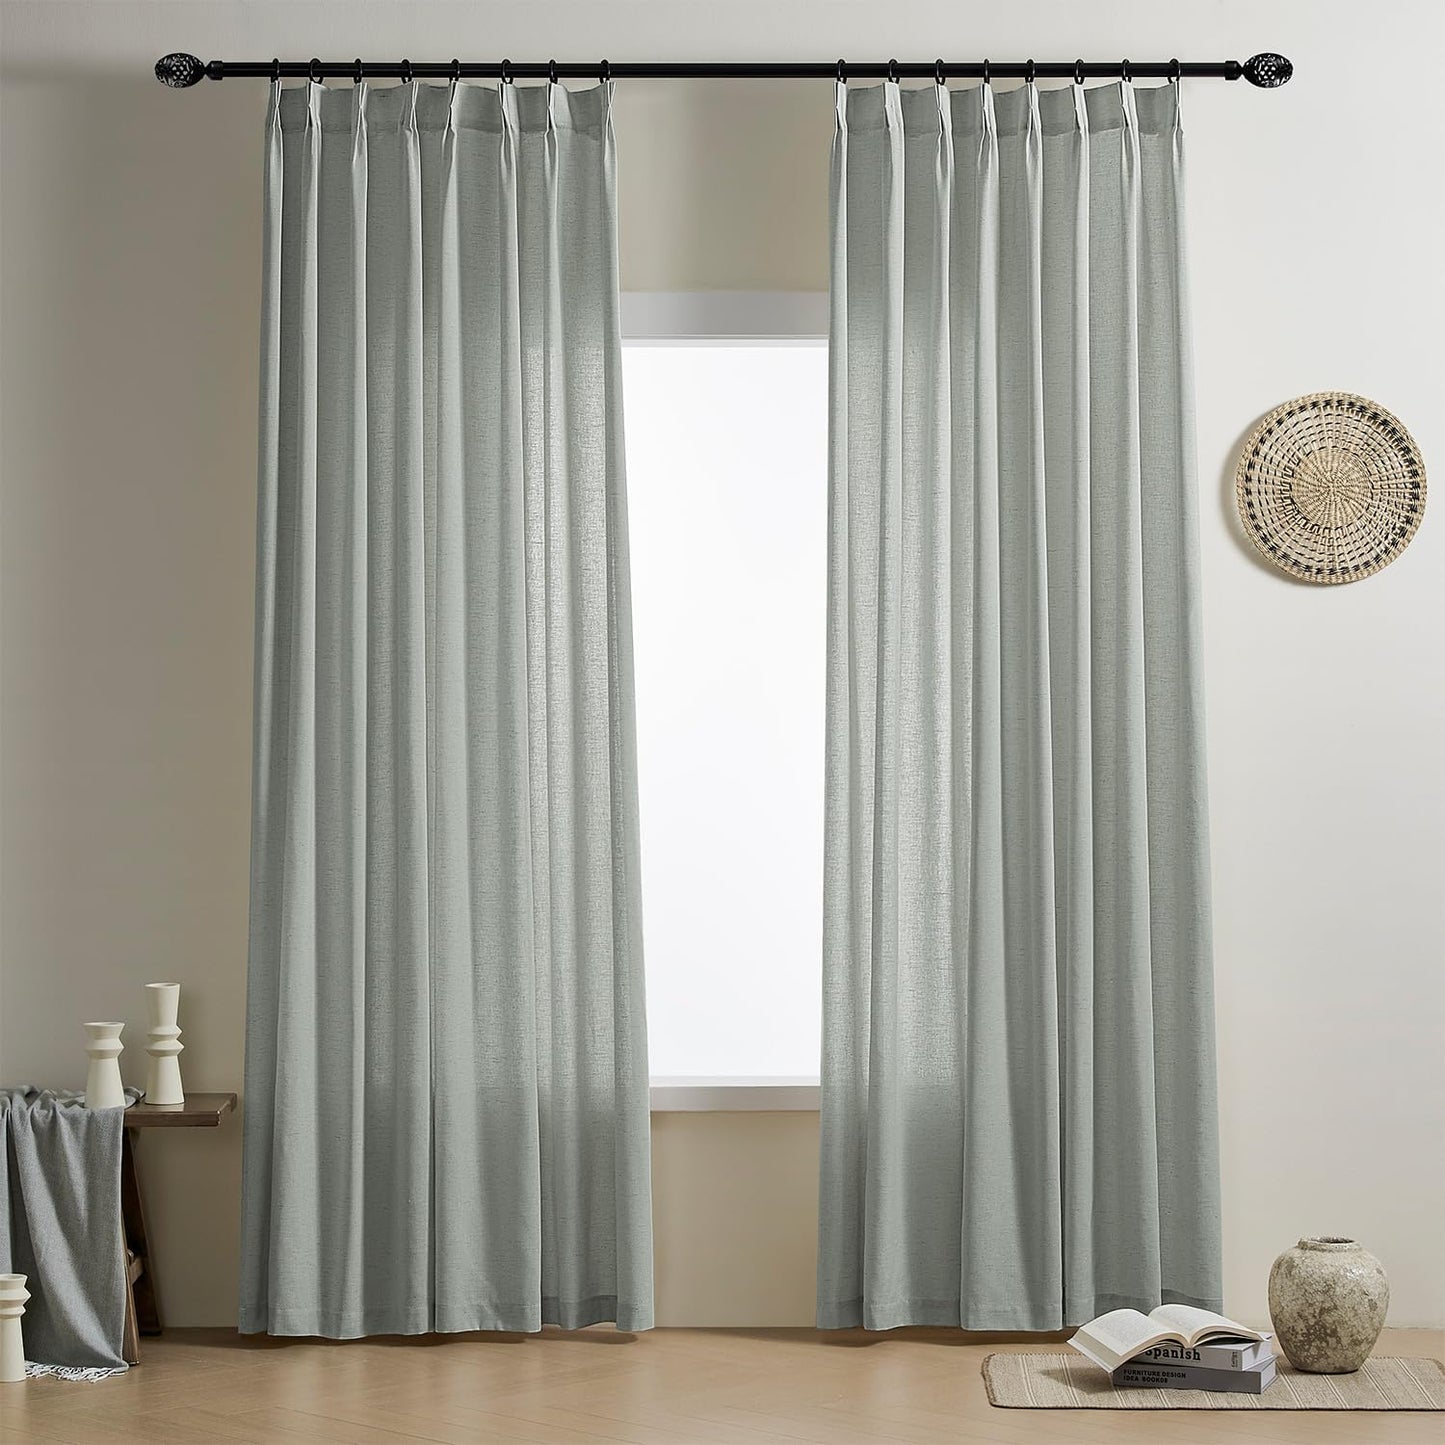 Rutterllow Pinch Pleated Flax Linen Curtains 80 Inch Length 2 Panels Set for Living Room Back Tab Semi Sheer Light Filtering Privacy Farmhouse Rustic Curtains for Bedroom  Rutterllow Flagstone 50"W X 108"L X2 